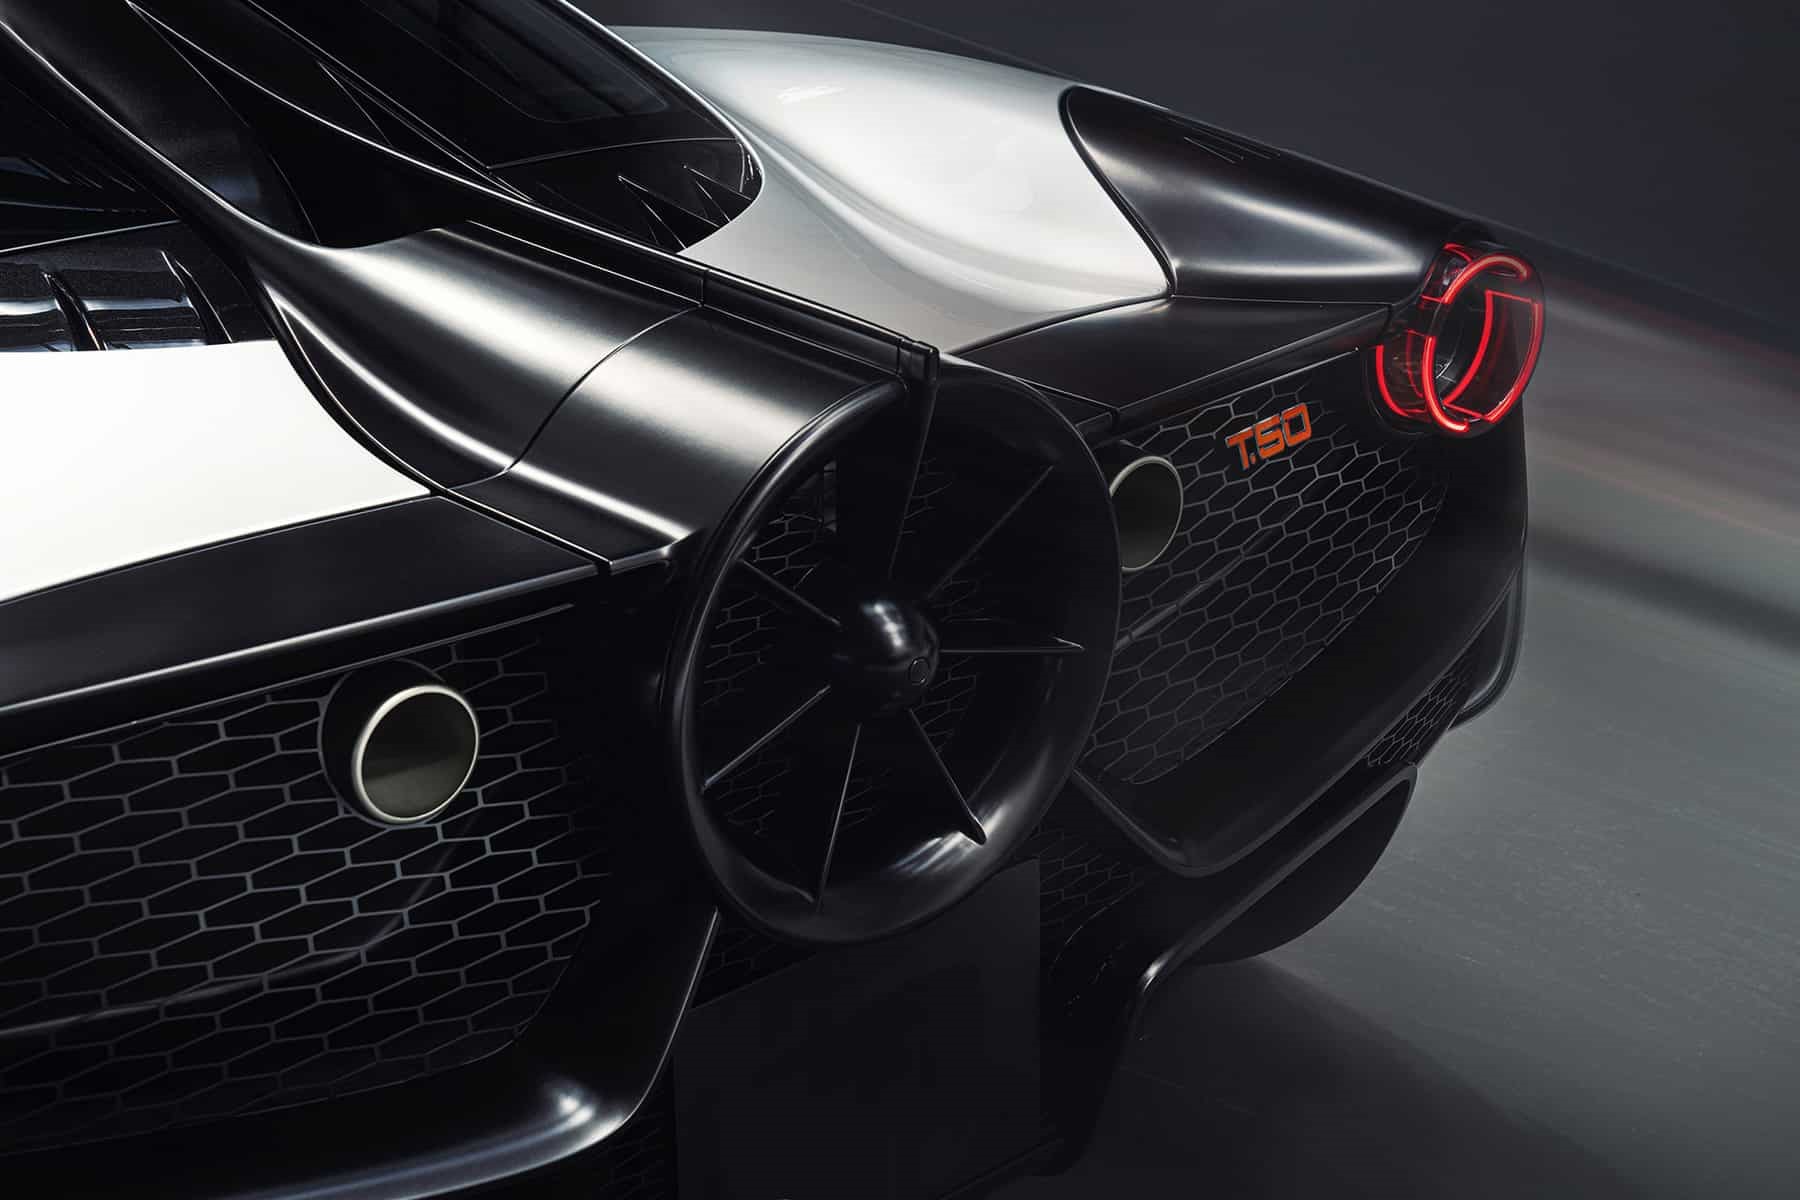 The fan on the T.50 helps to manipulate the airflow around the car and improve the performance.